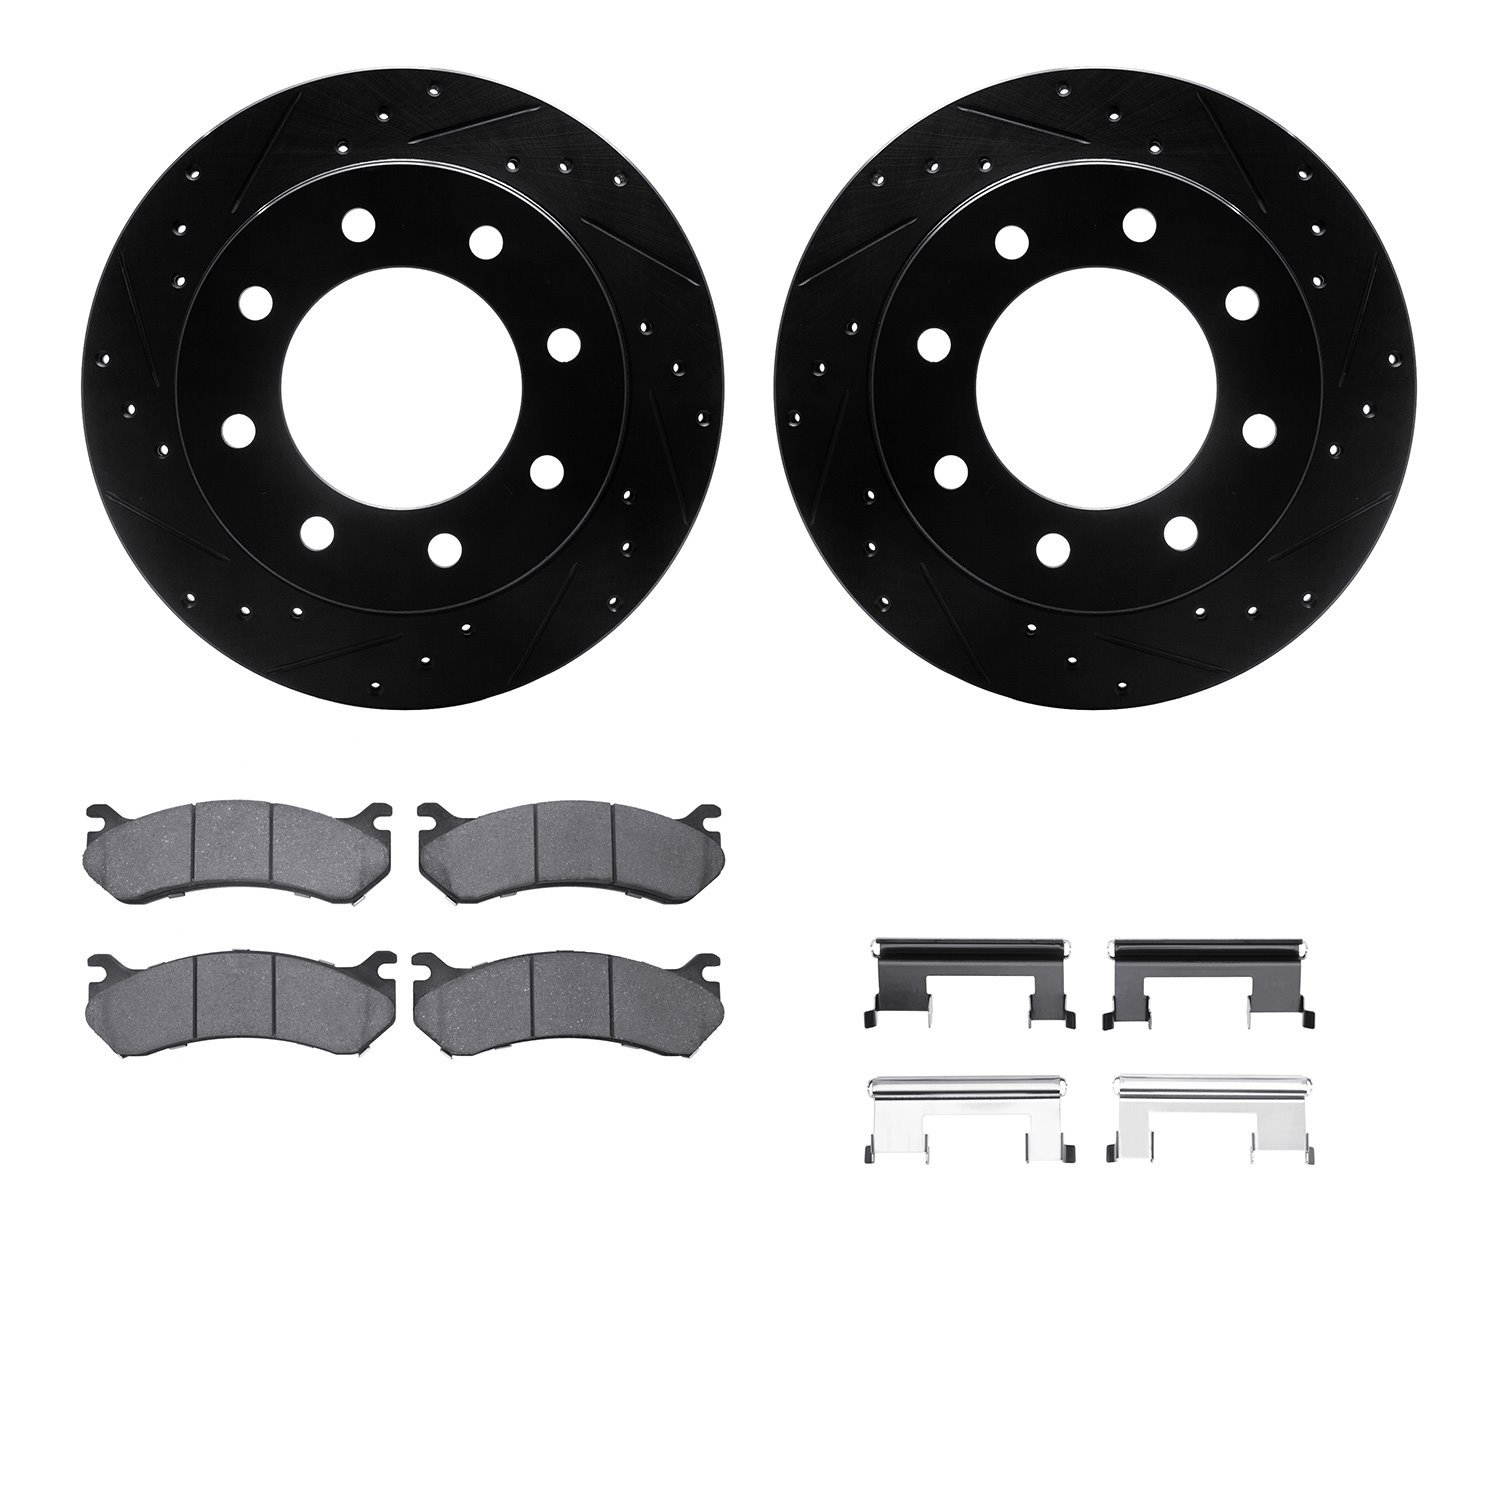 8412-48026 Drilled/Slotted Brake Rotors with Ultimate-Duty Brake Pads Kit & Hardware [Black], 1999-2009 GM, Position: Rear